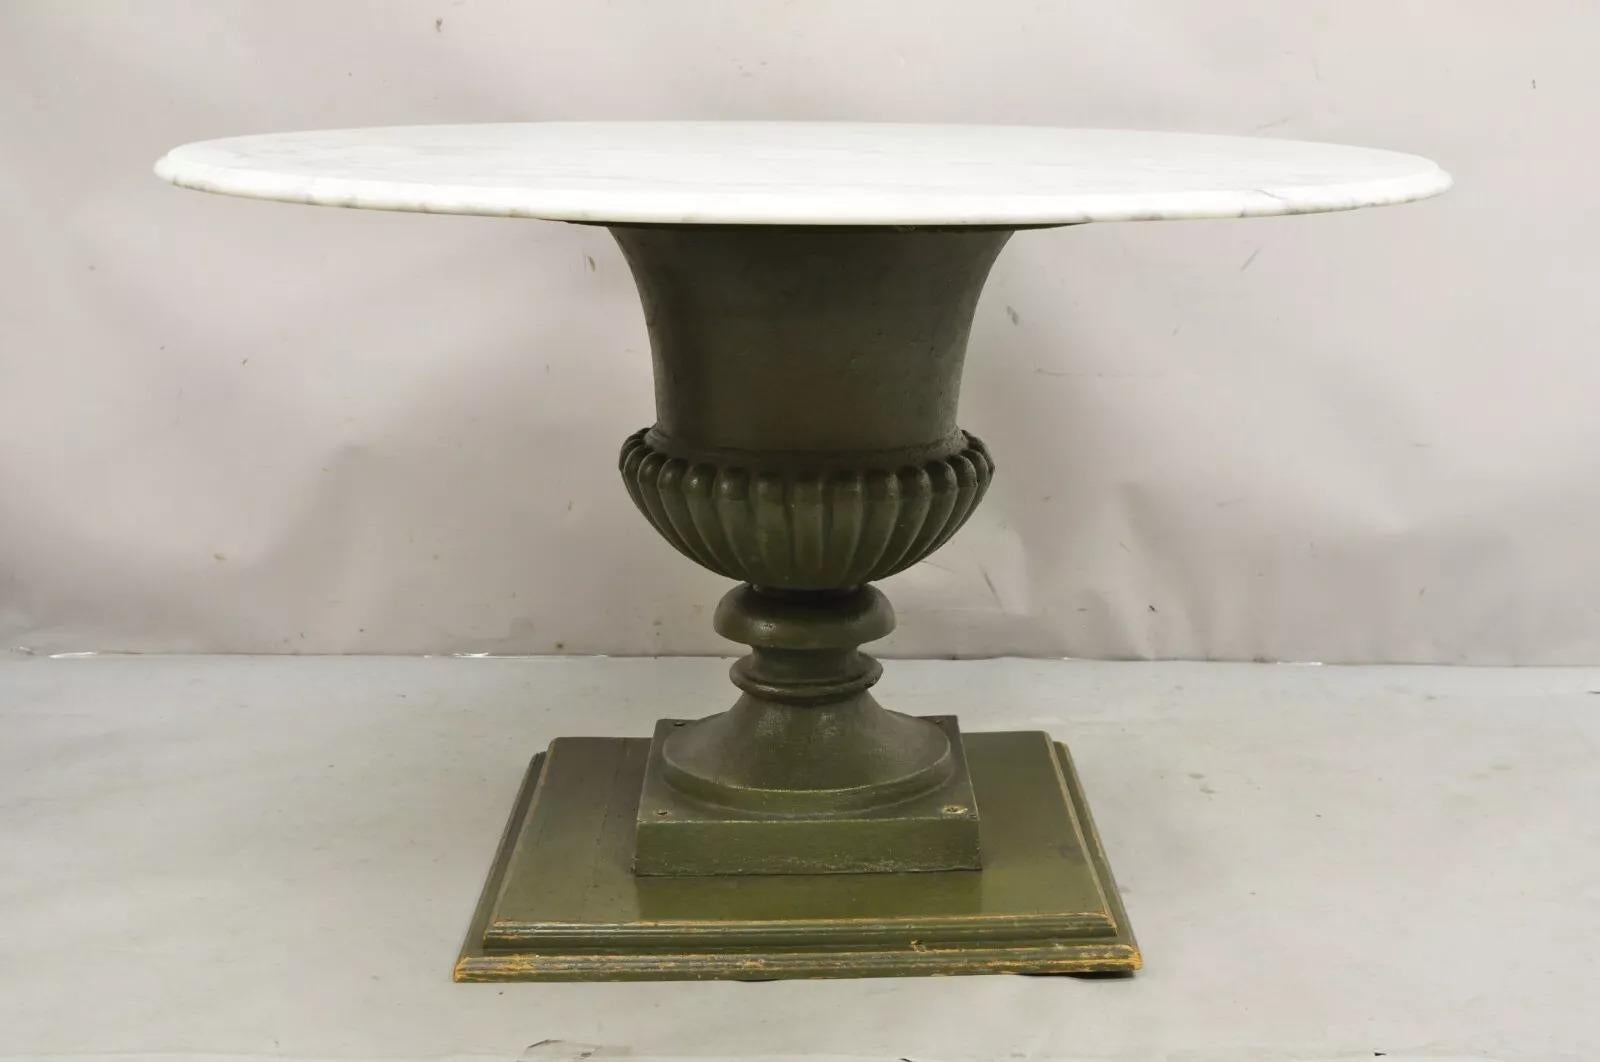 Vintage Italian Classical Style Cast Iron Urn Planter Pedestal Base with Round Marble Top Dining Table. Item. Green cast iron urn form pedestal base, 48